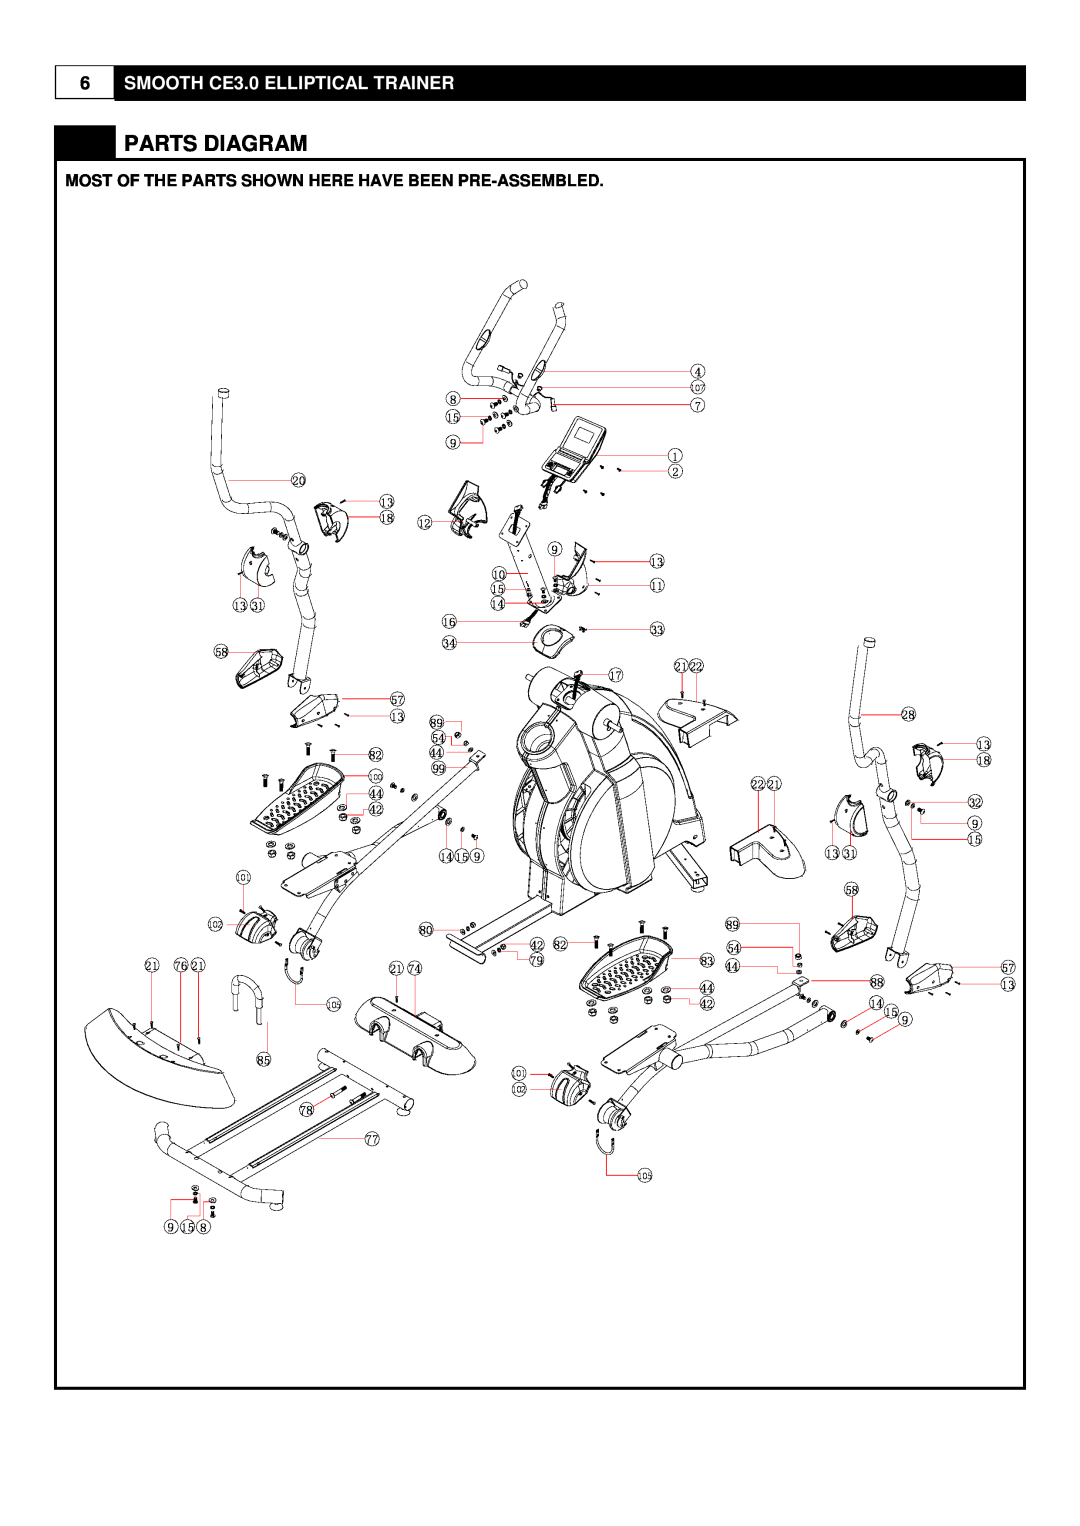 Smooth Fitness CE-3.0 Parts Diagram, SMOOTH CE3.0 ELLIPTICAL TRAINER, Most Of The Parts Shown Here Have Been Pre-Assembled 